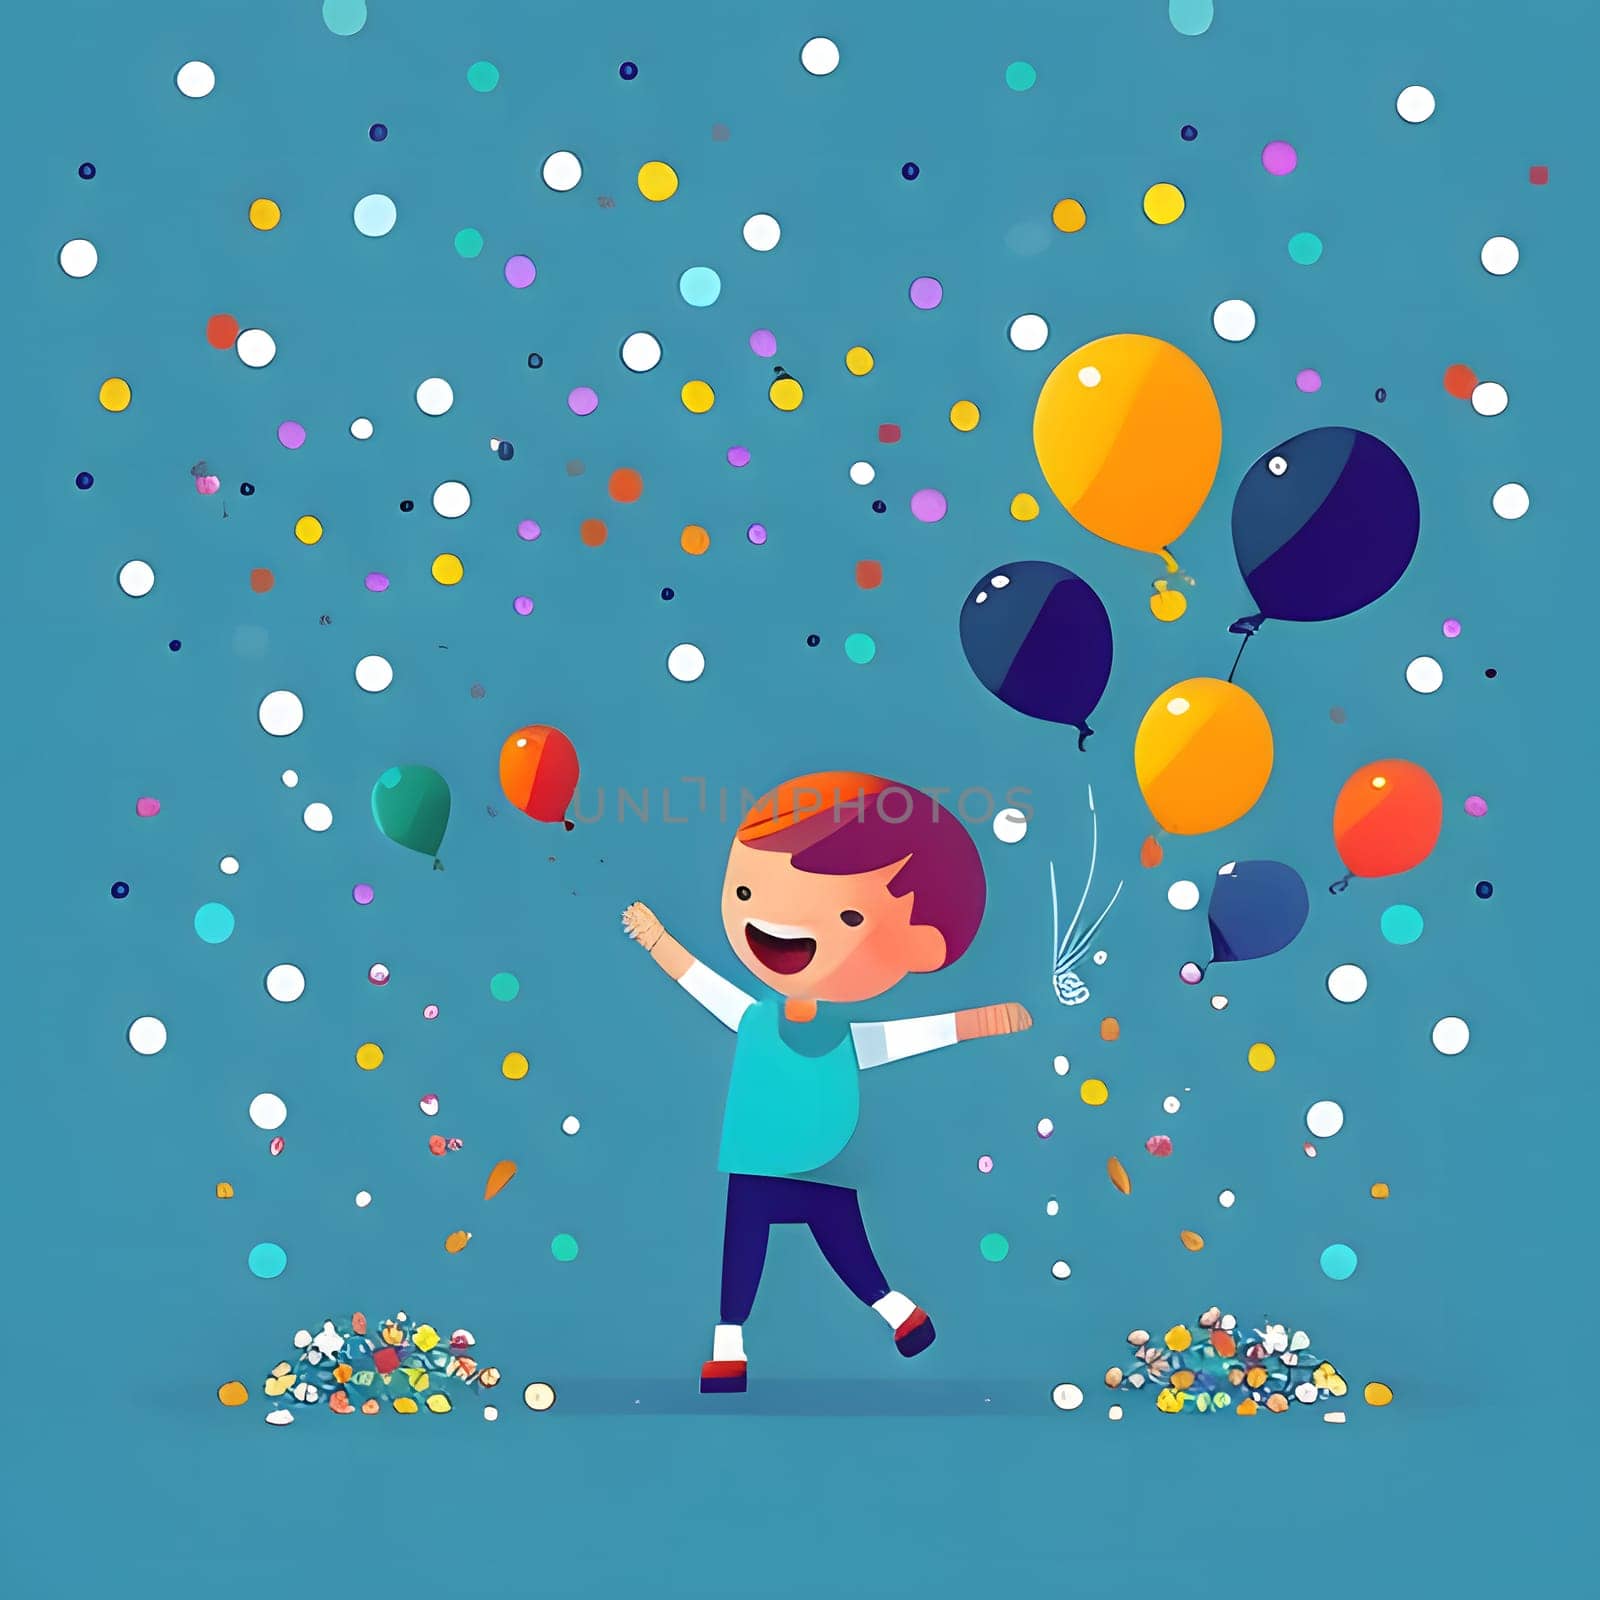 Illustration of a cheerful boy with colorful balloons and confetti on a blue background. New Year's party and celebrations. by ThemesS